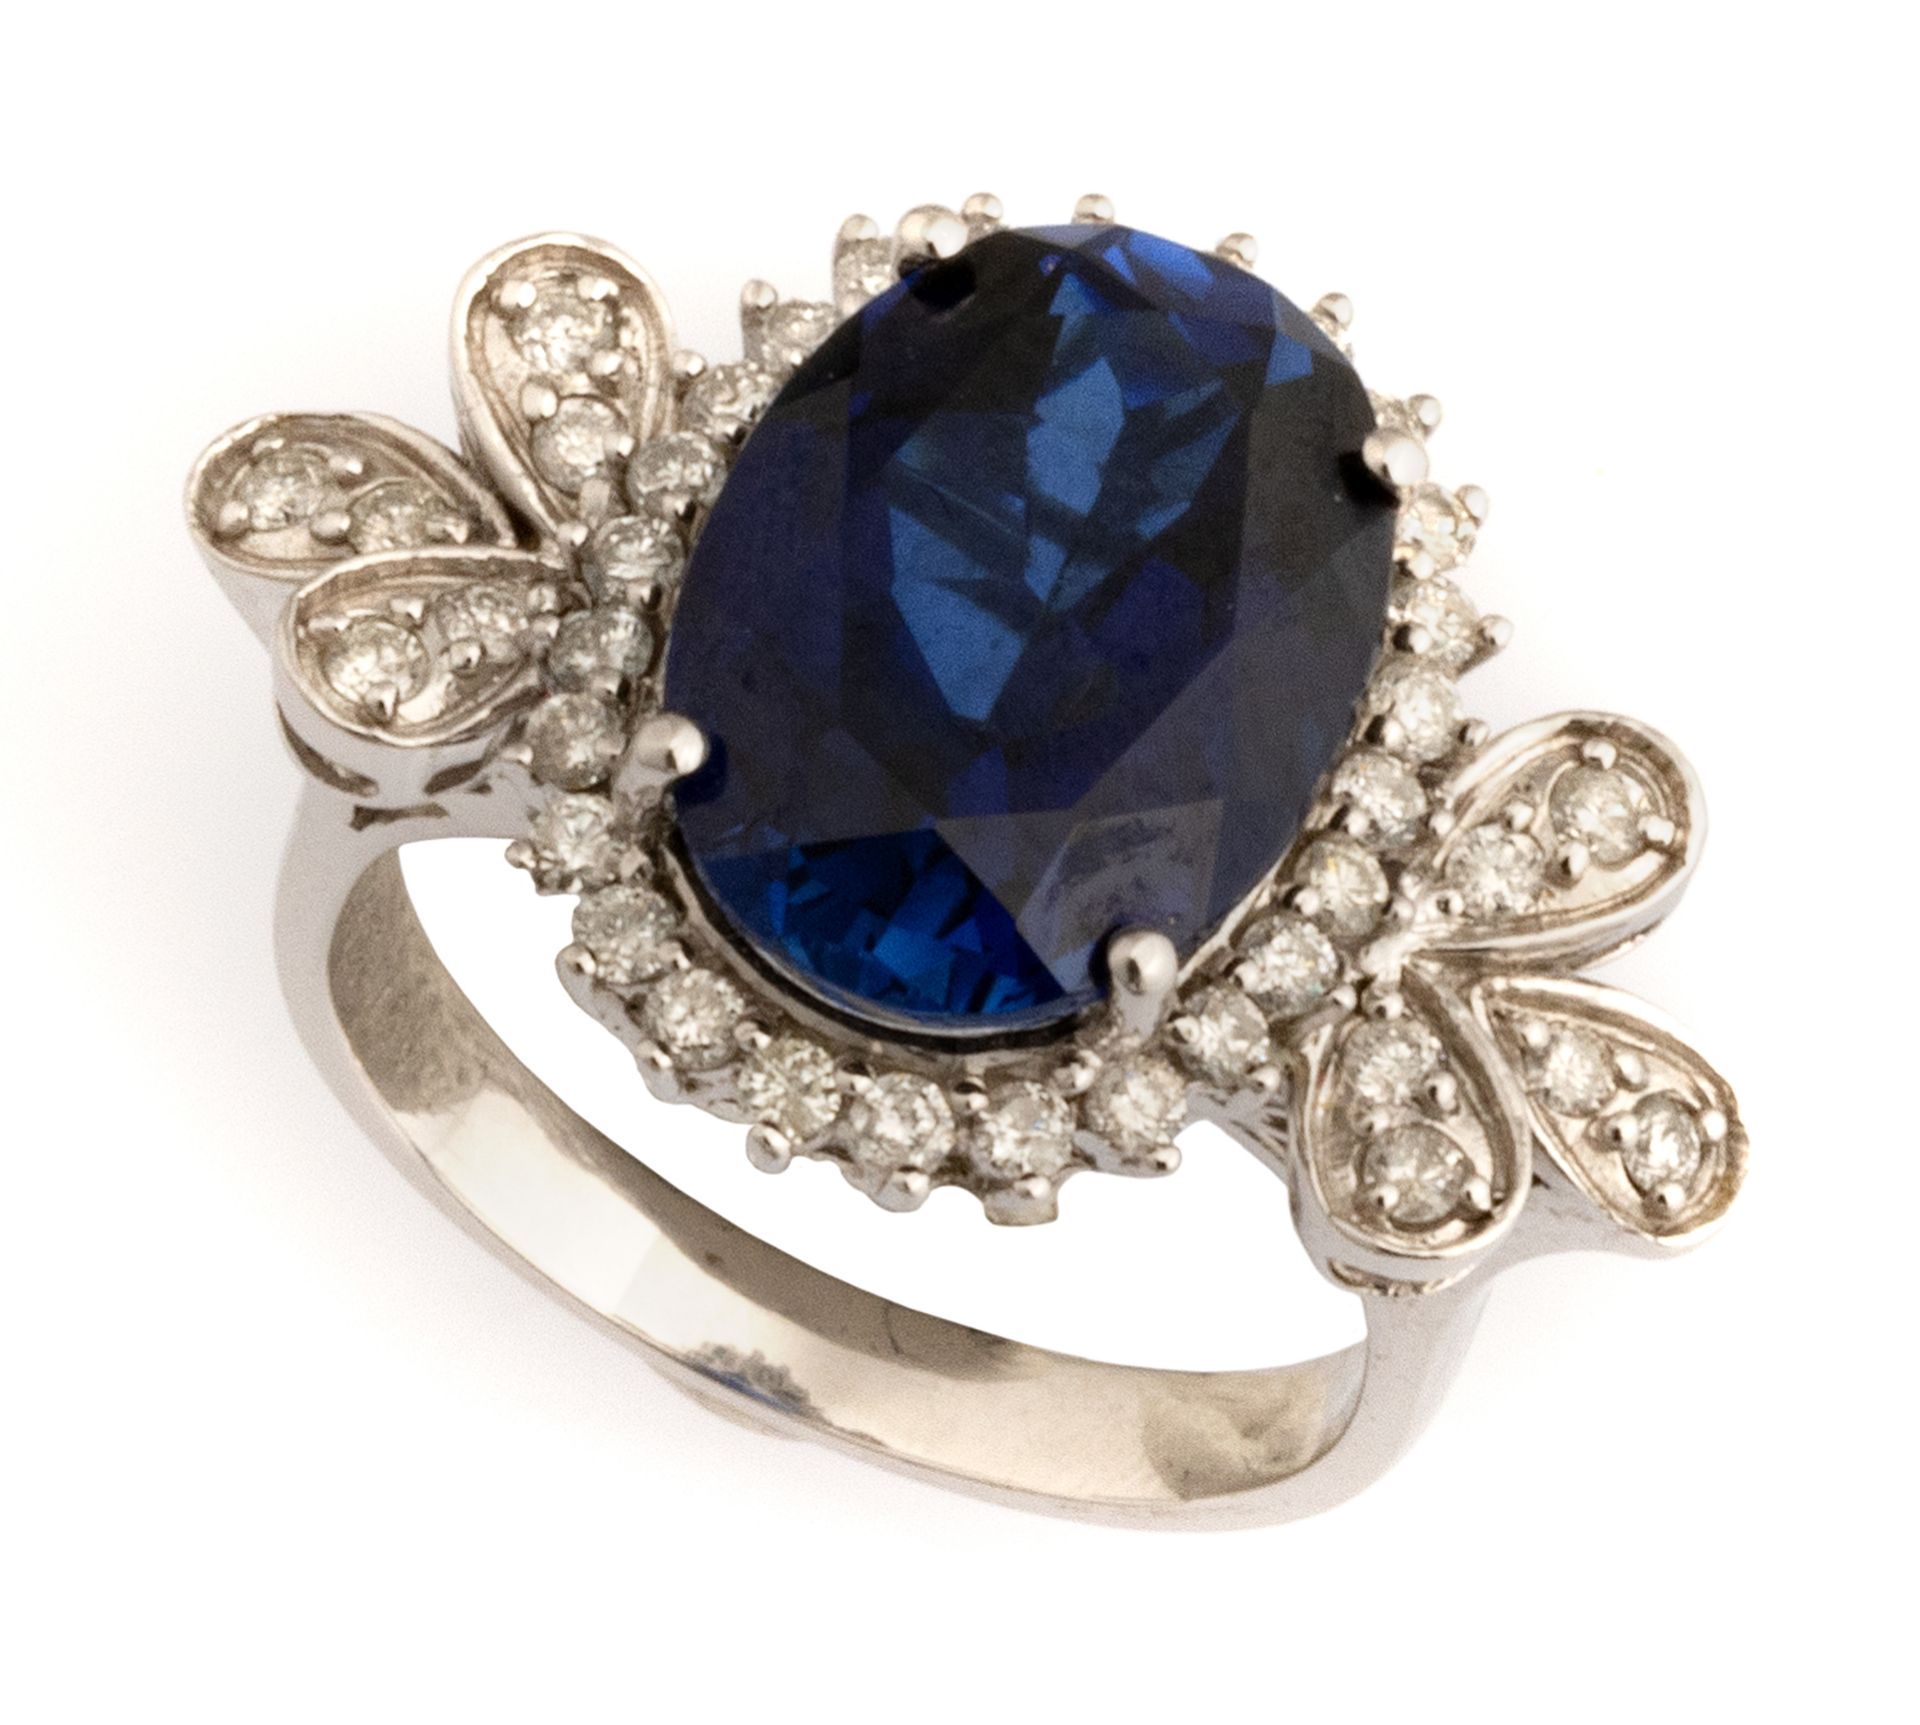 WHITE GOLD RING WITH BLUE STONE